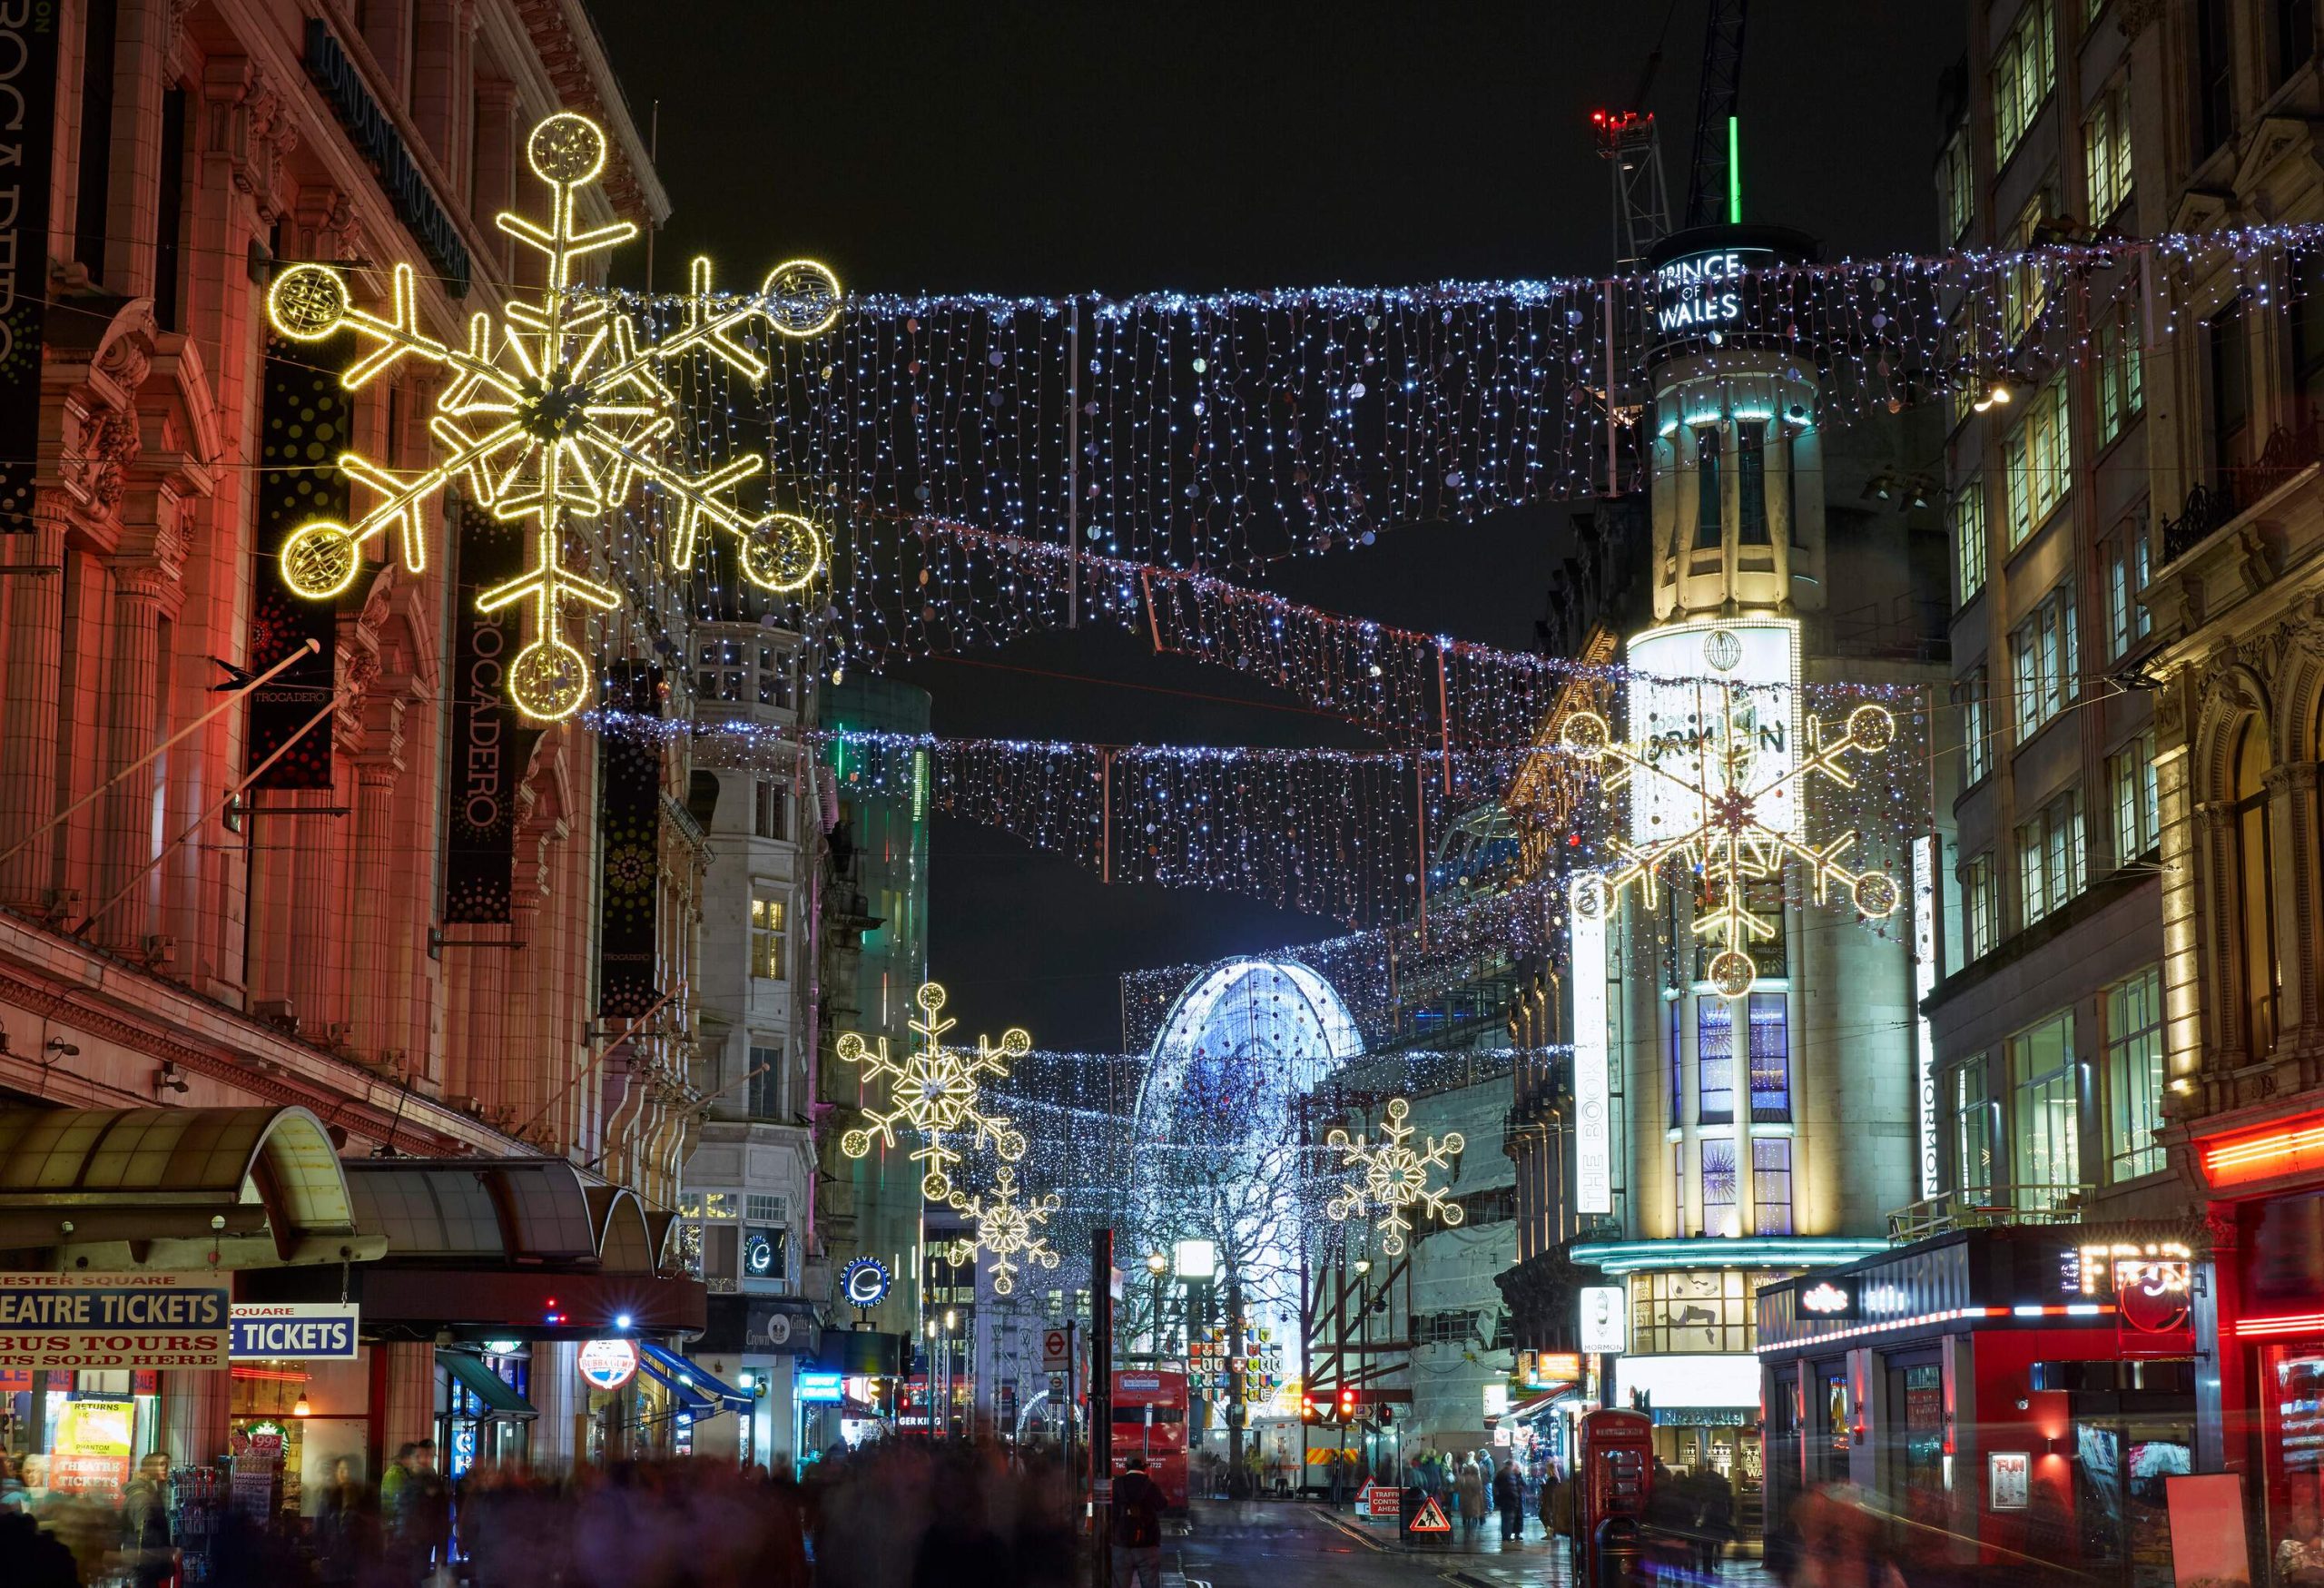 Brightly lit hanging Christmas lights in the centre of a commercial street full of people.